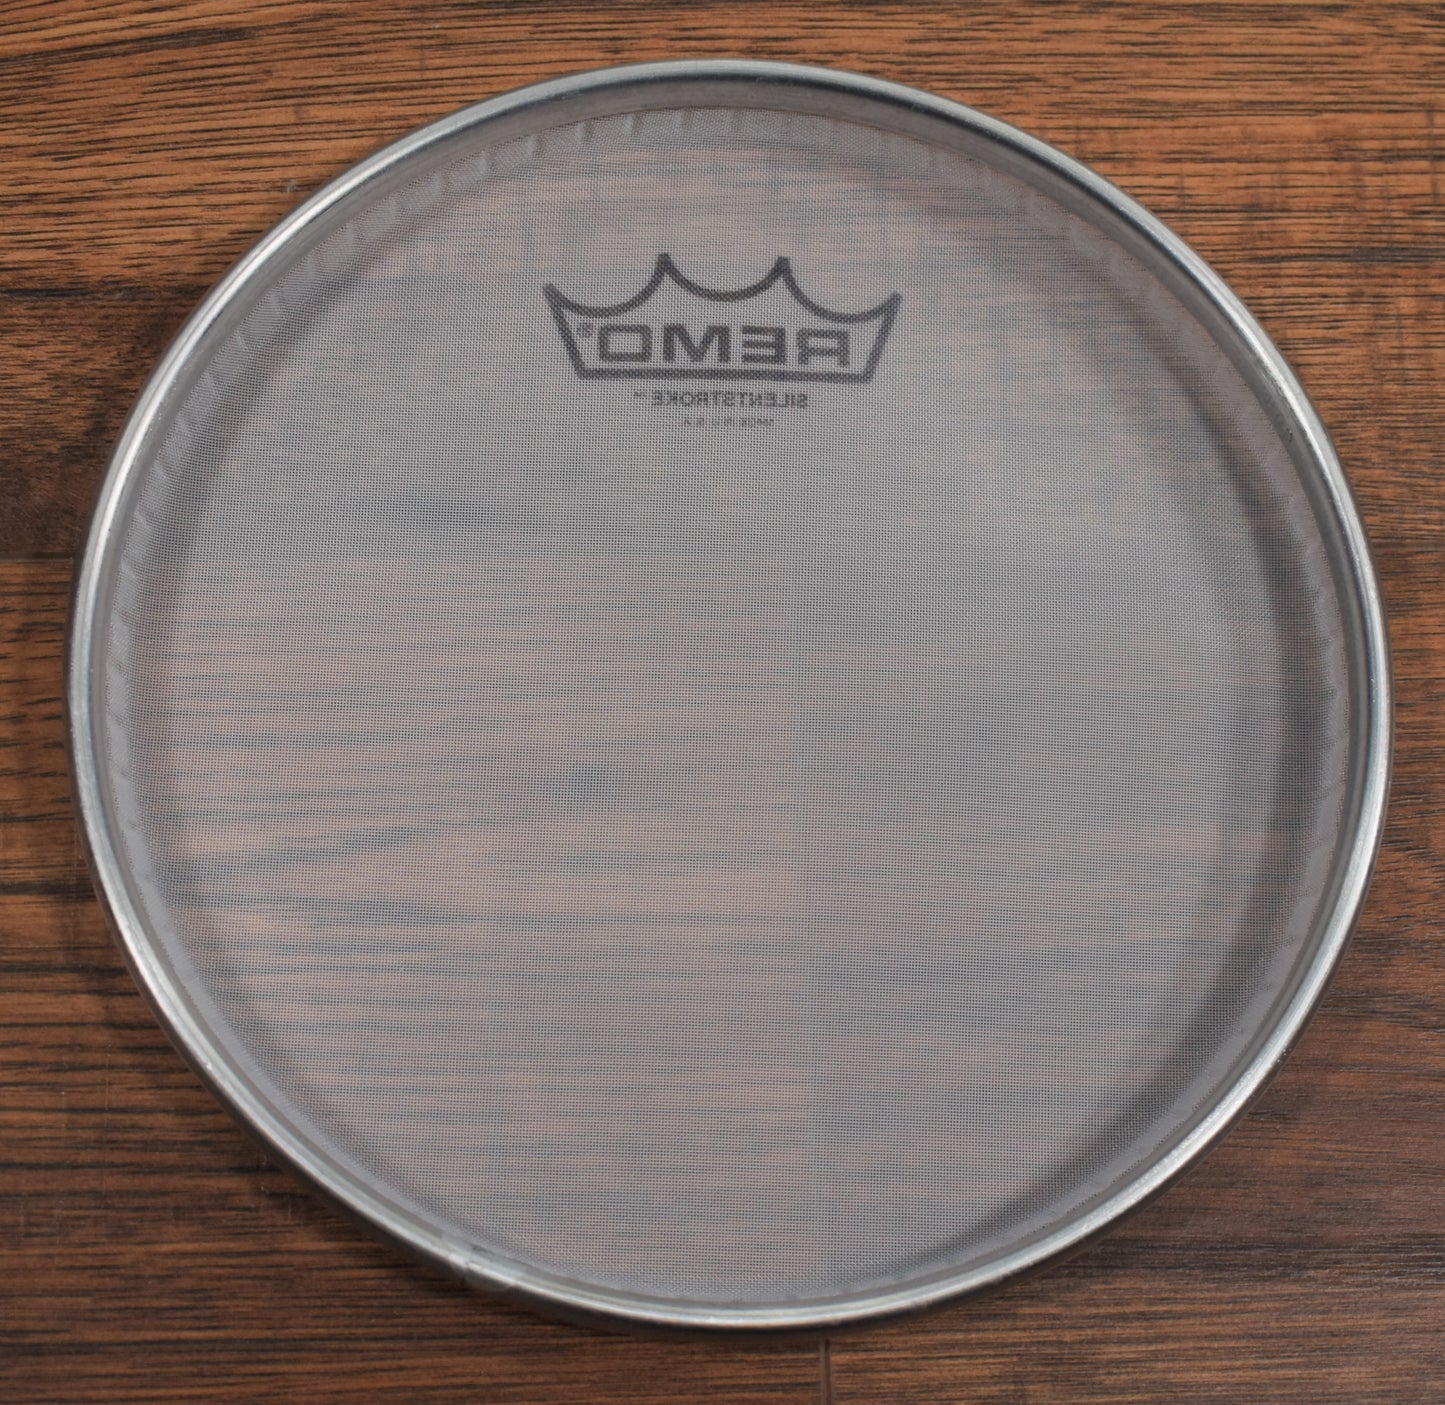 Remo SN-0008-00 Silent Stroke Special 8" Batter Drumhead